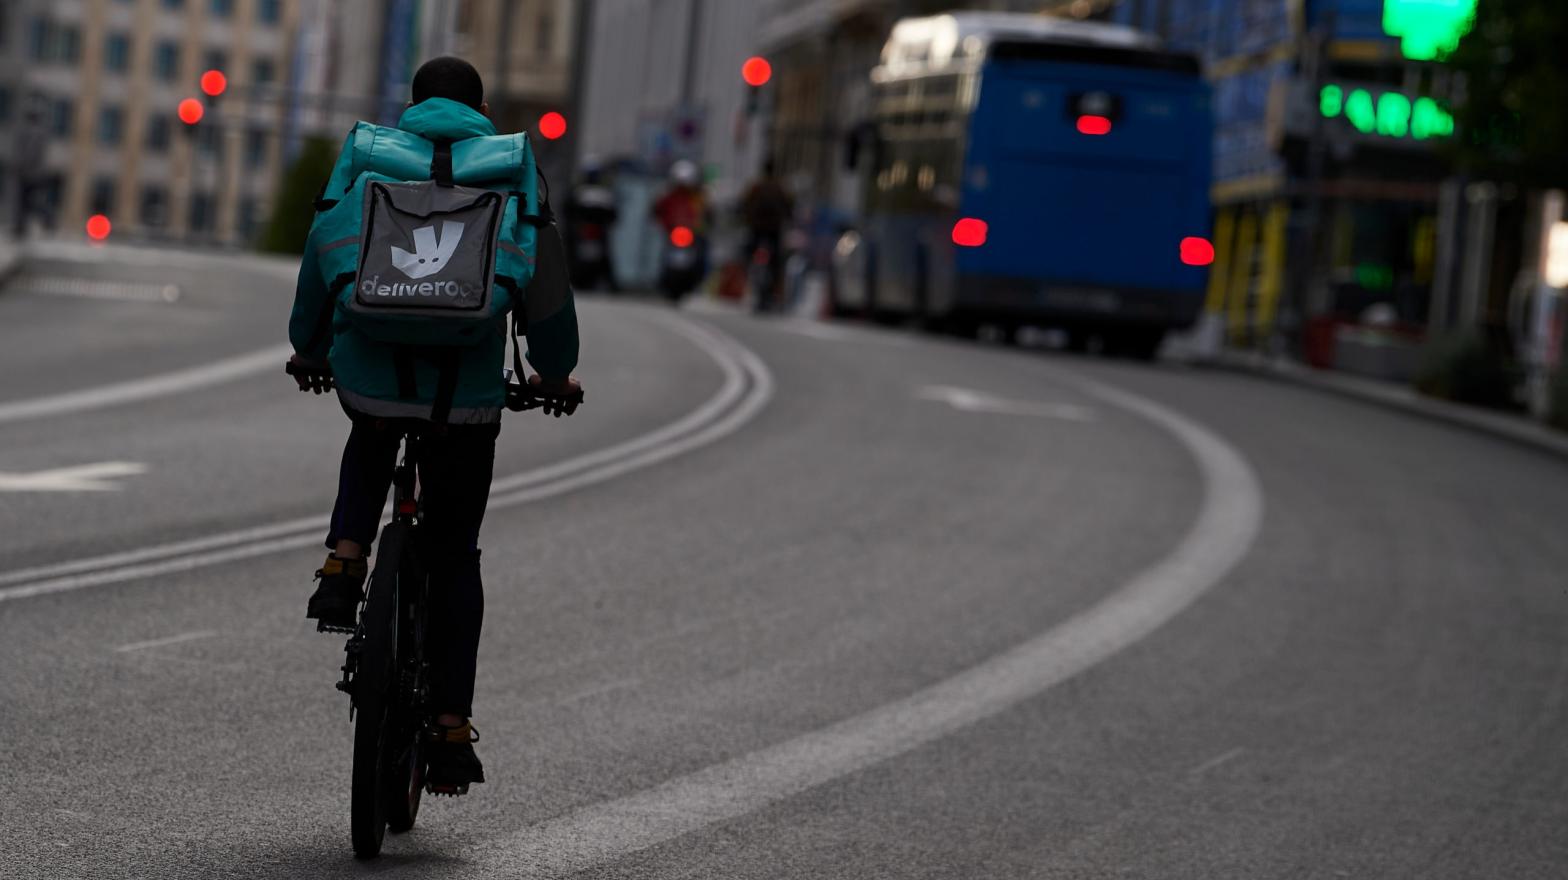 File photo of a Deliveroo rider in Madrid, Spain (Photo: Carlos Alvarez, Getty Images)